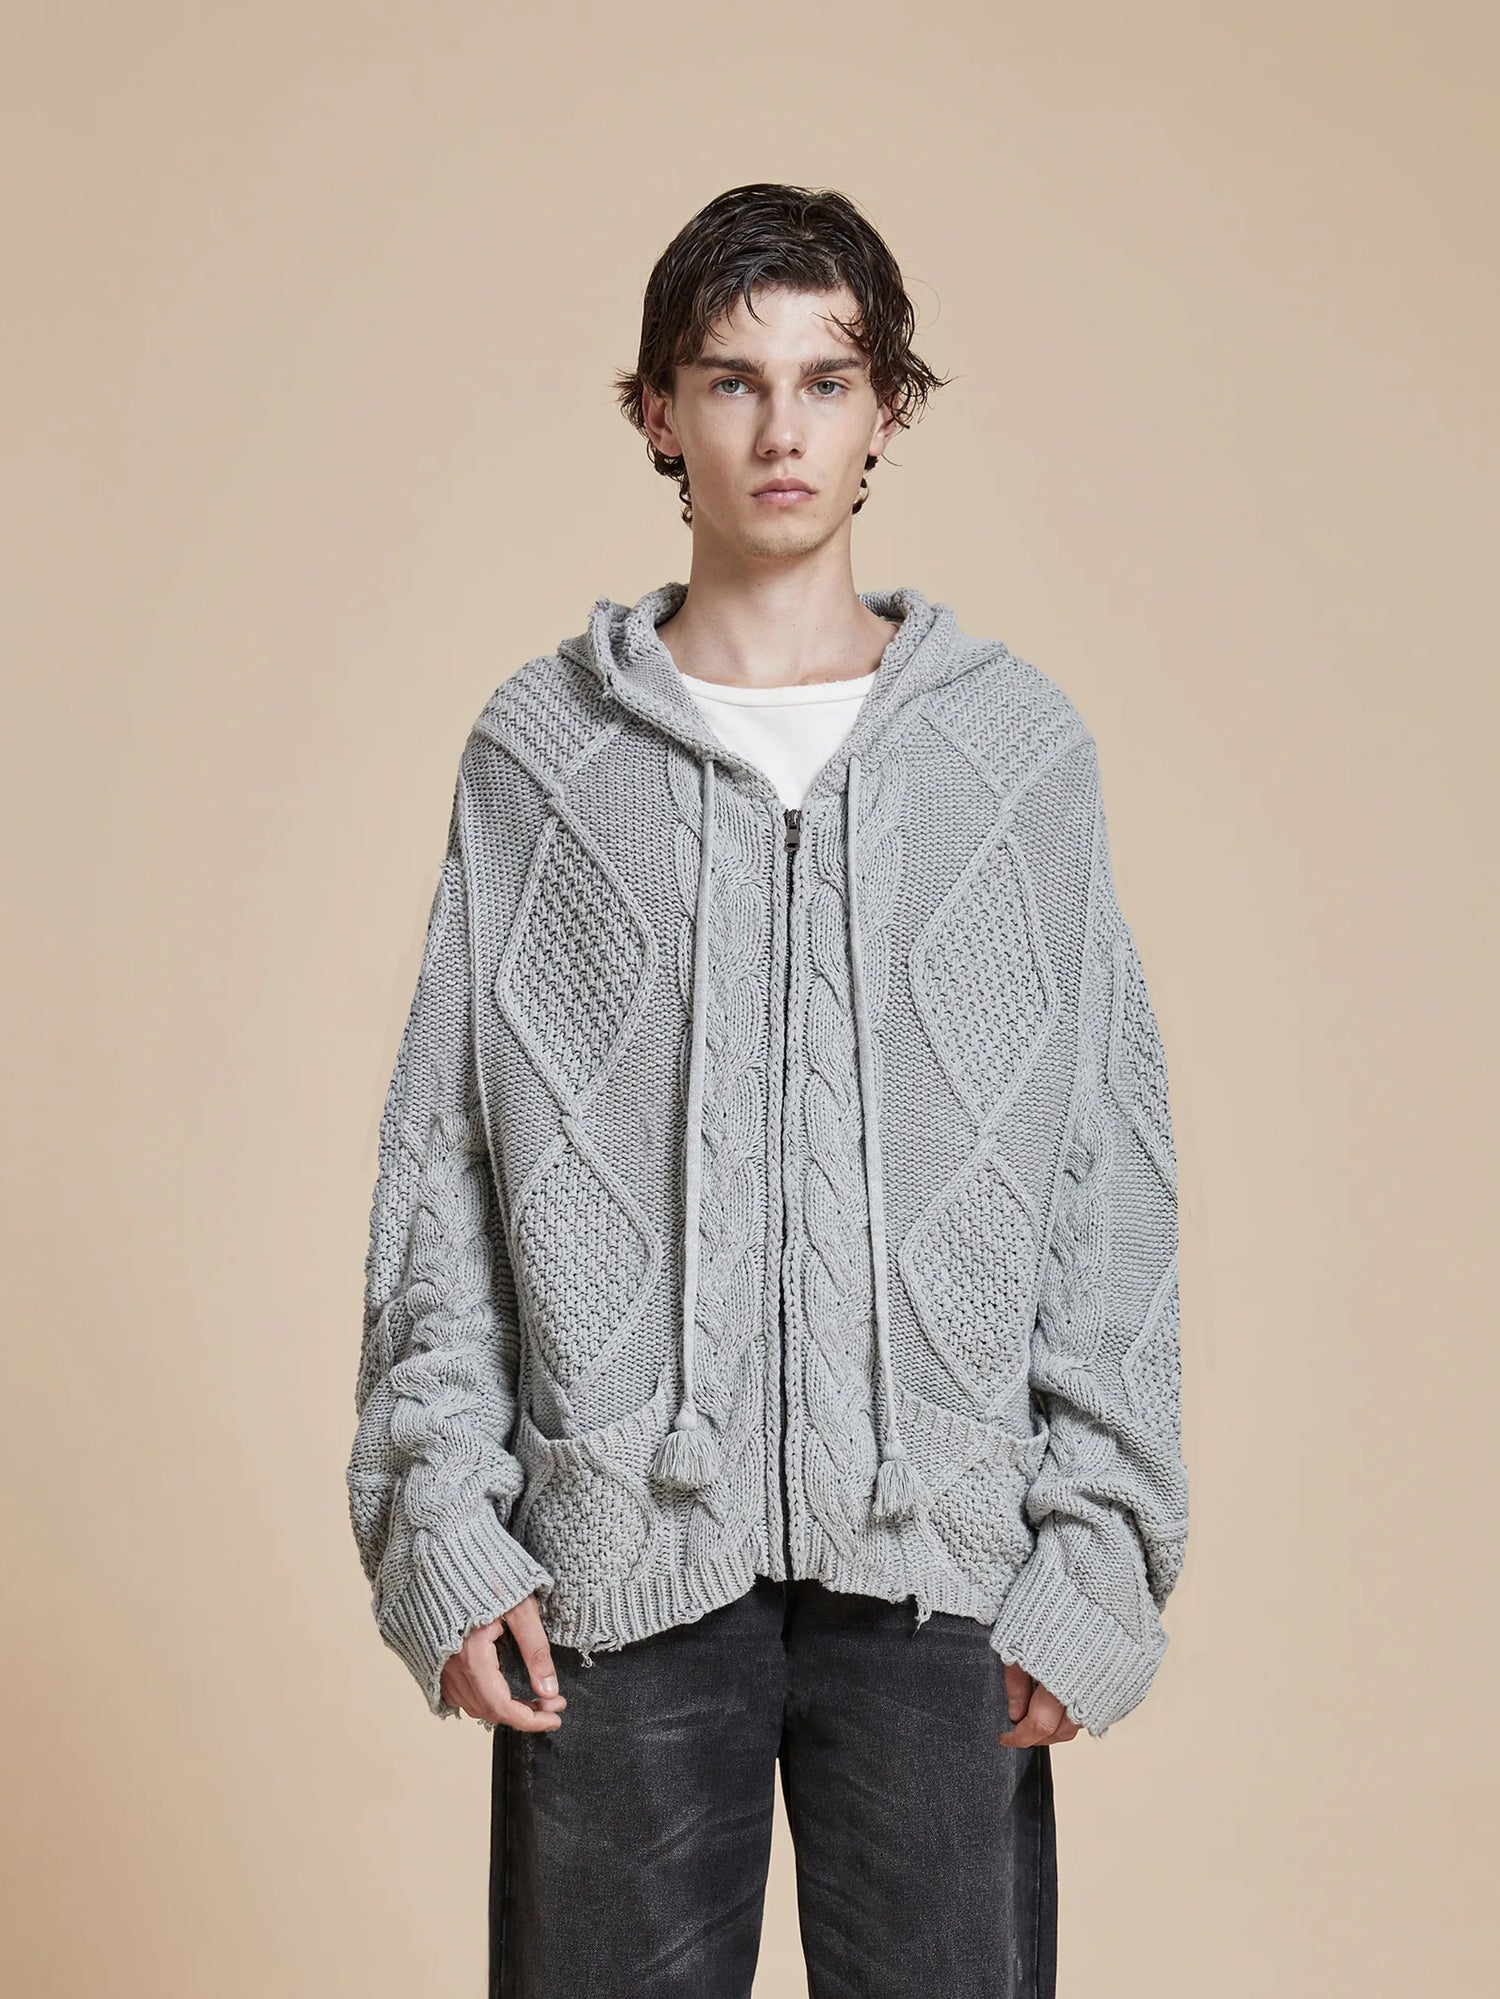 The model is wearing a warm grey Zip Up Distressed Cable Knit Hoodie from Found for comfort.